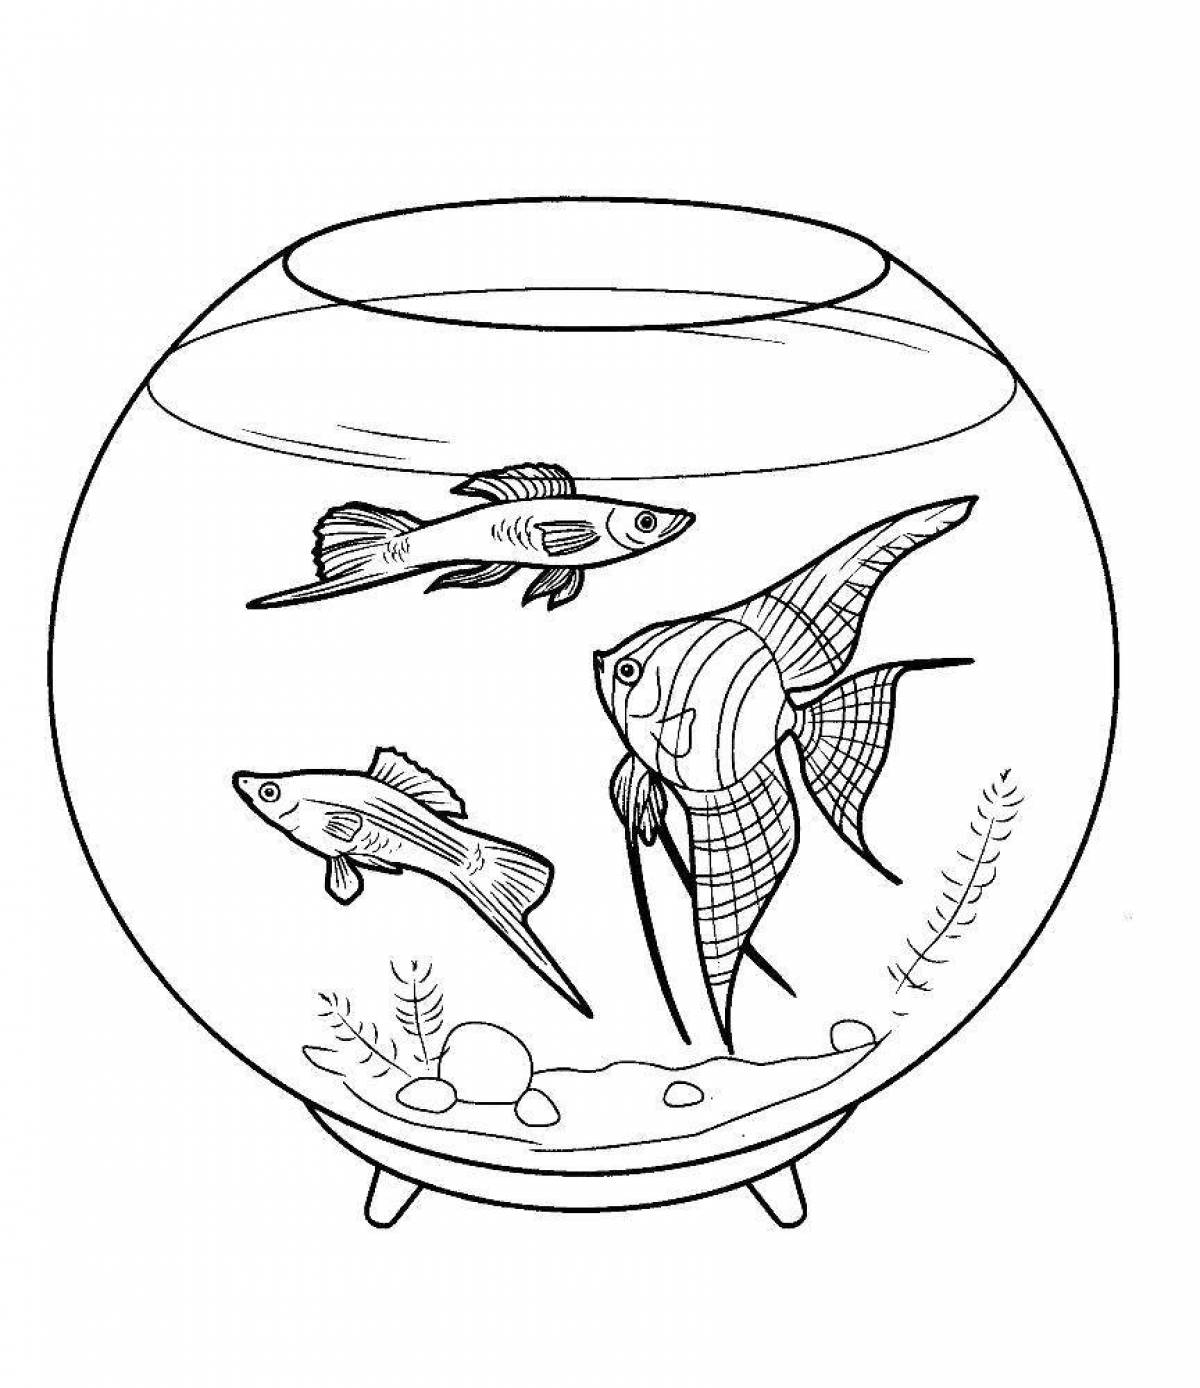 Aquarium playful coloring page for 3-4 year olds